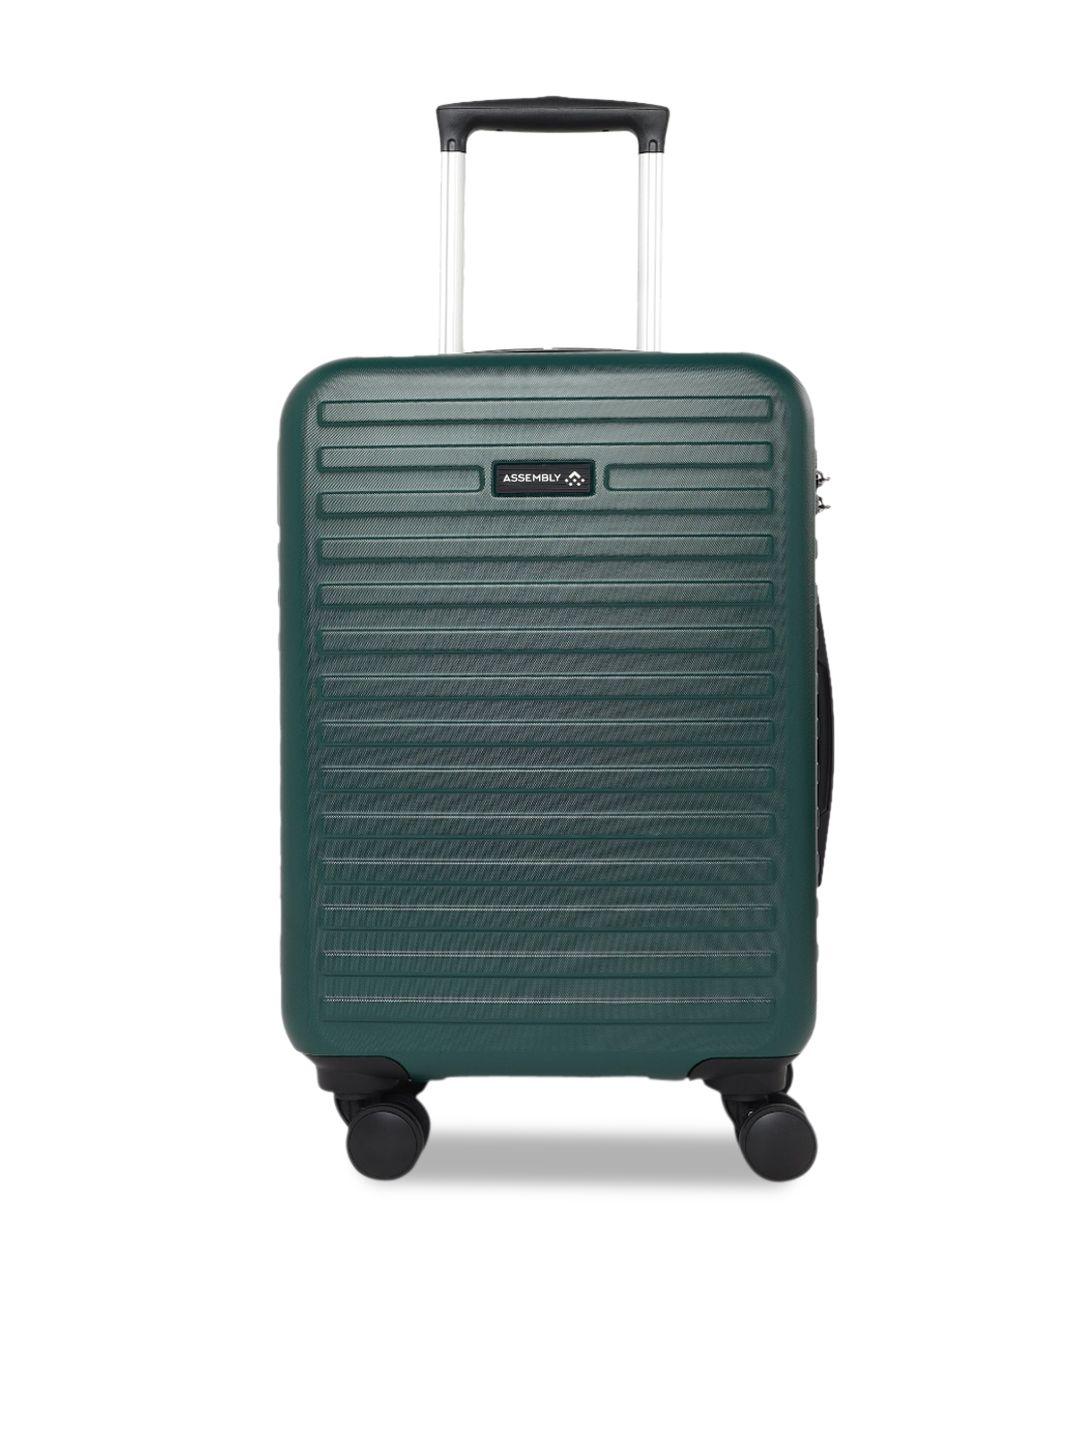 assembly green textured hard-sided trolley suitcase